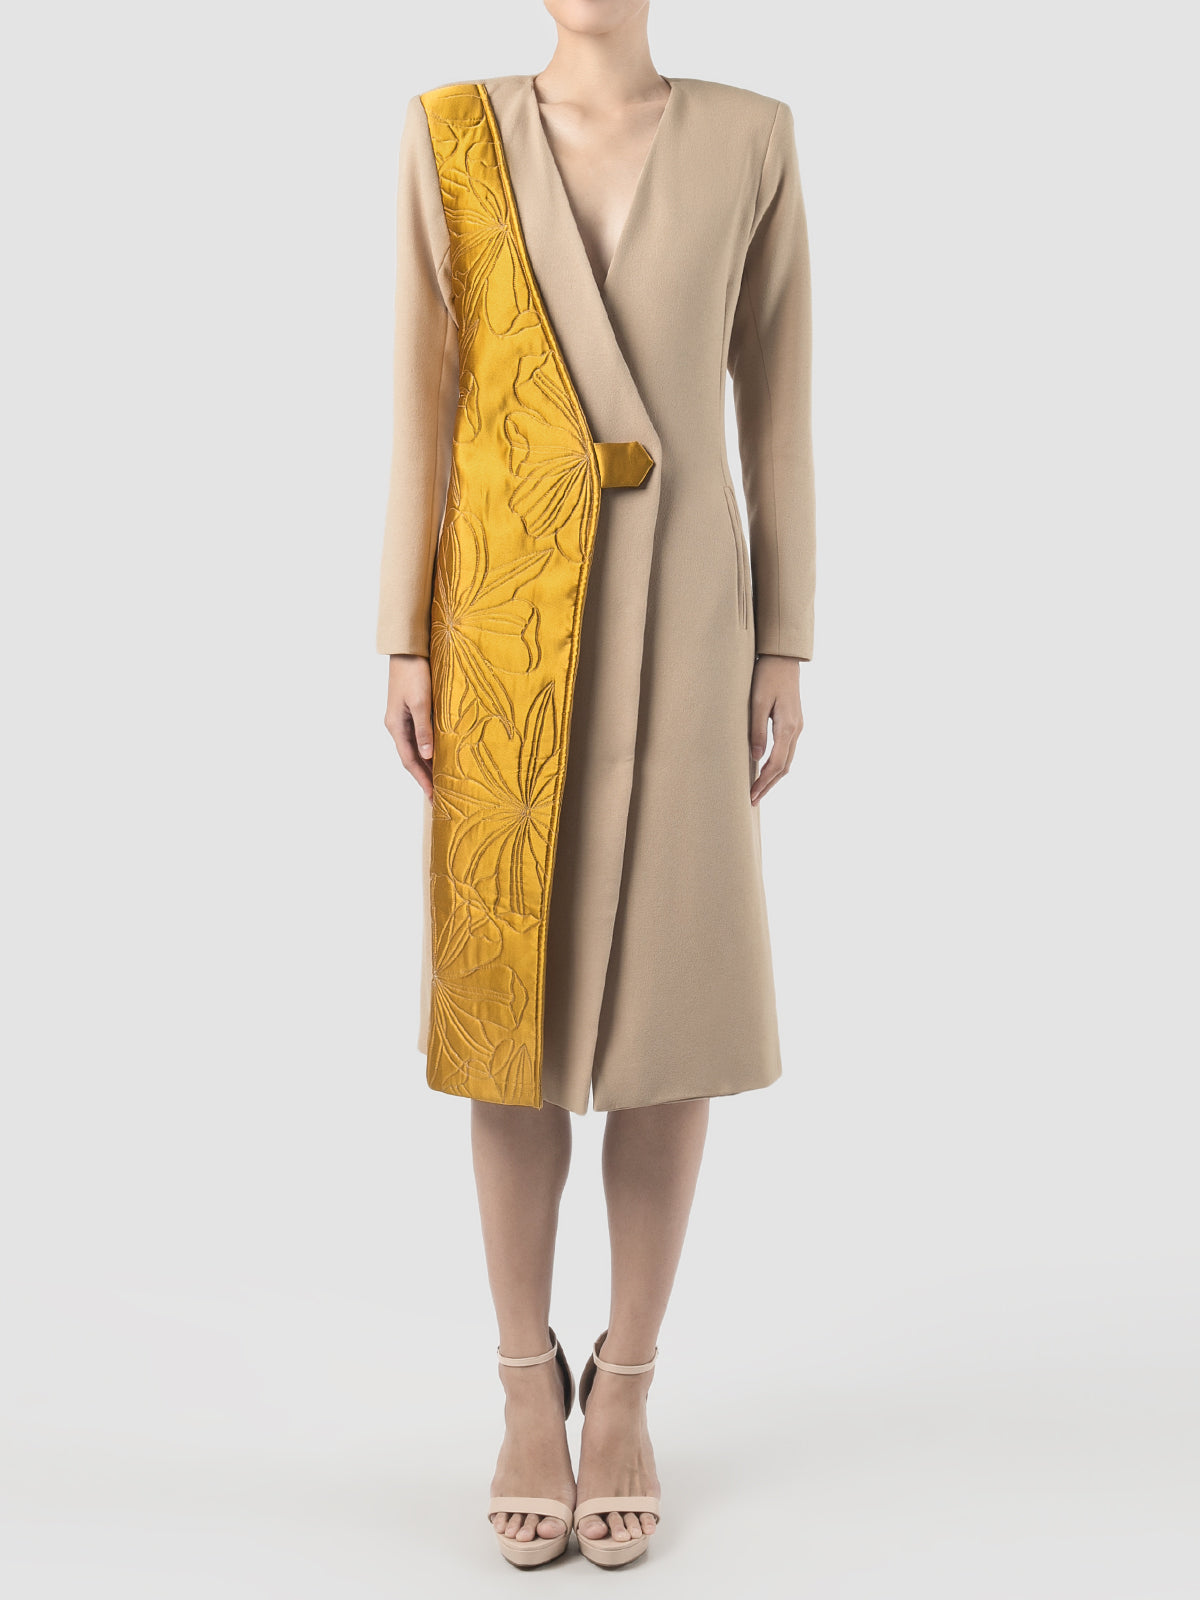 Repens camel brown coat with quilted layer